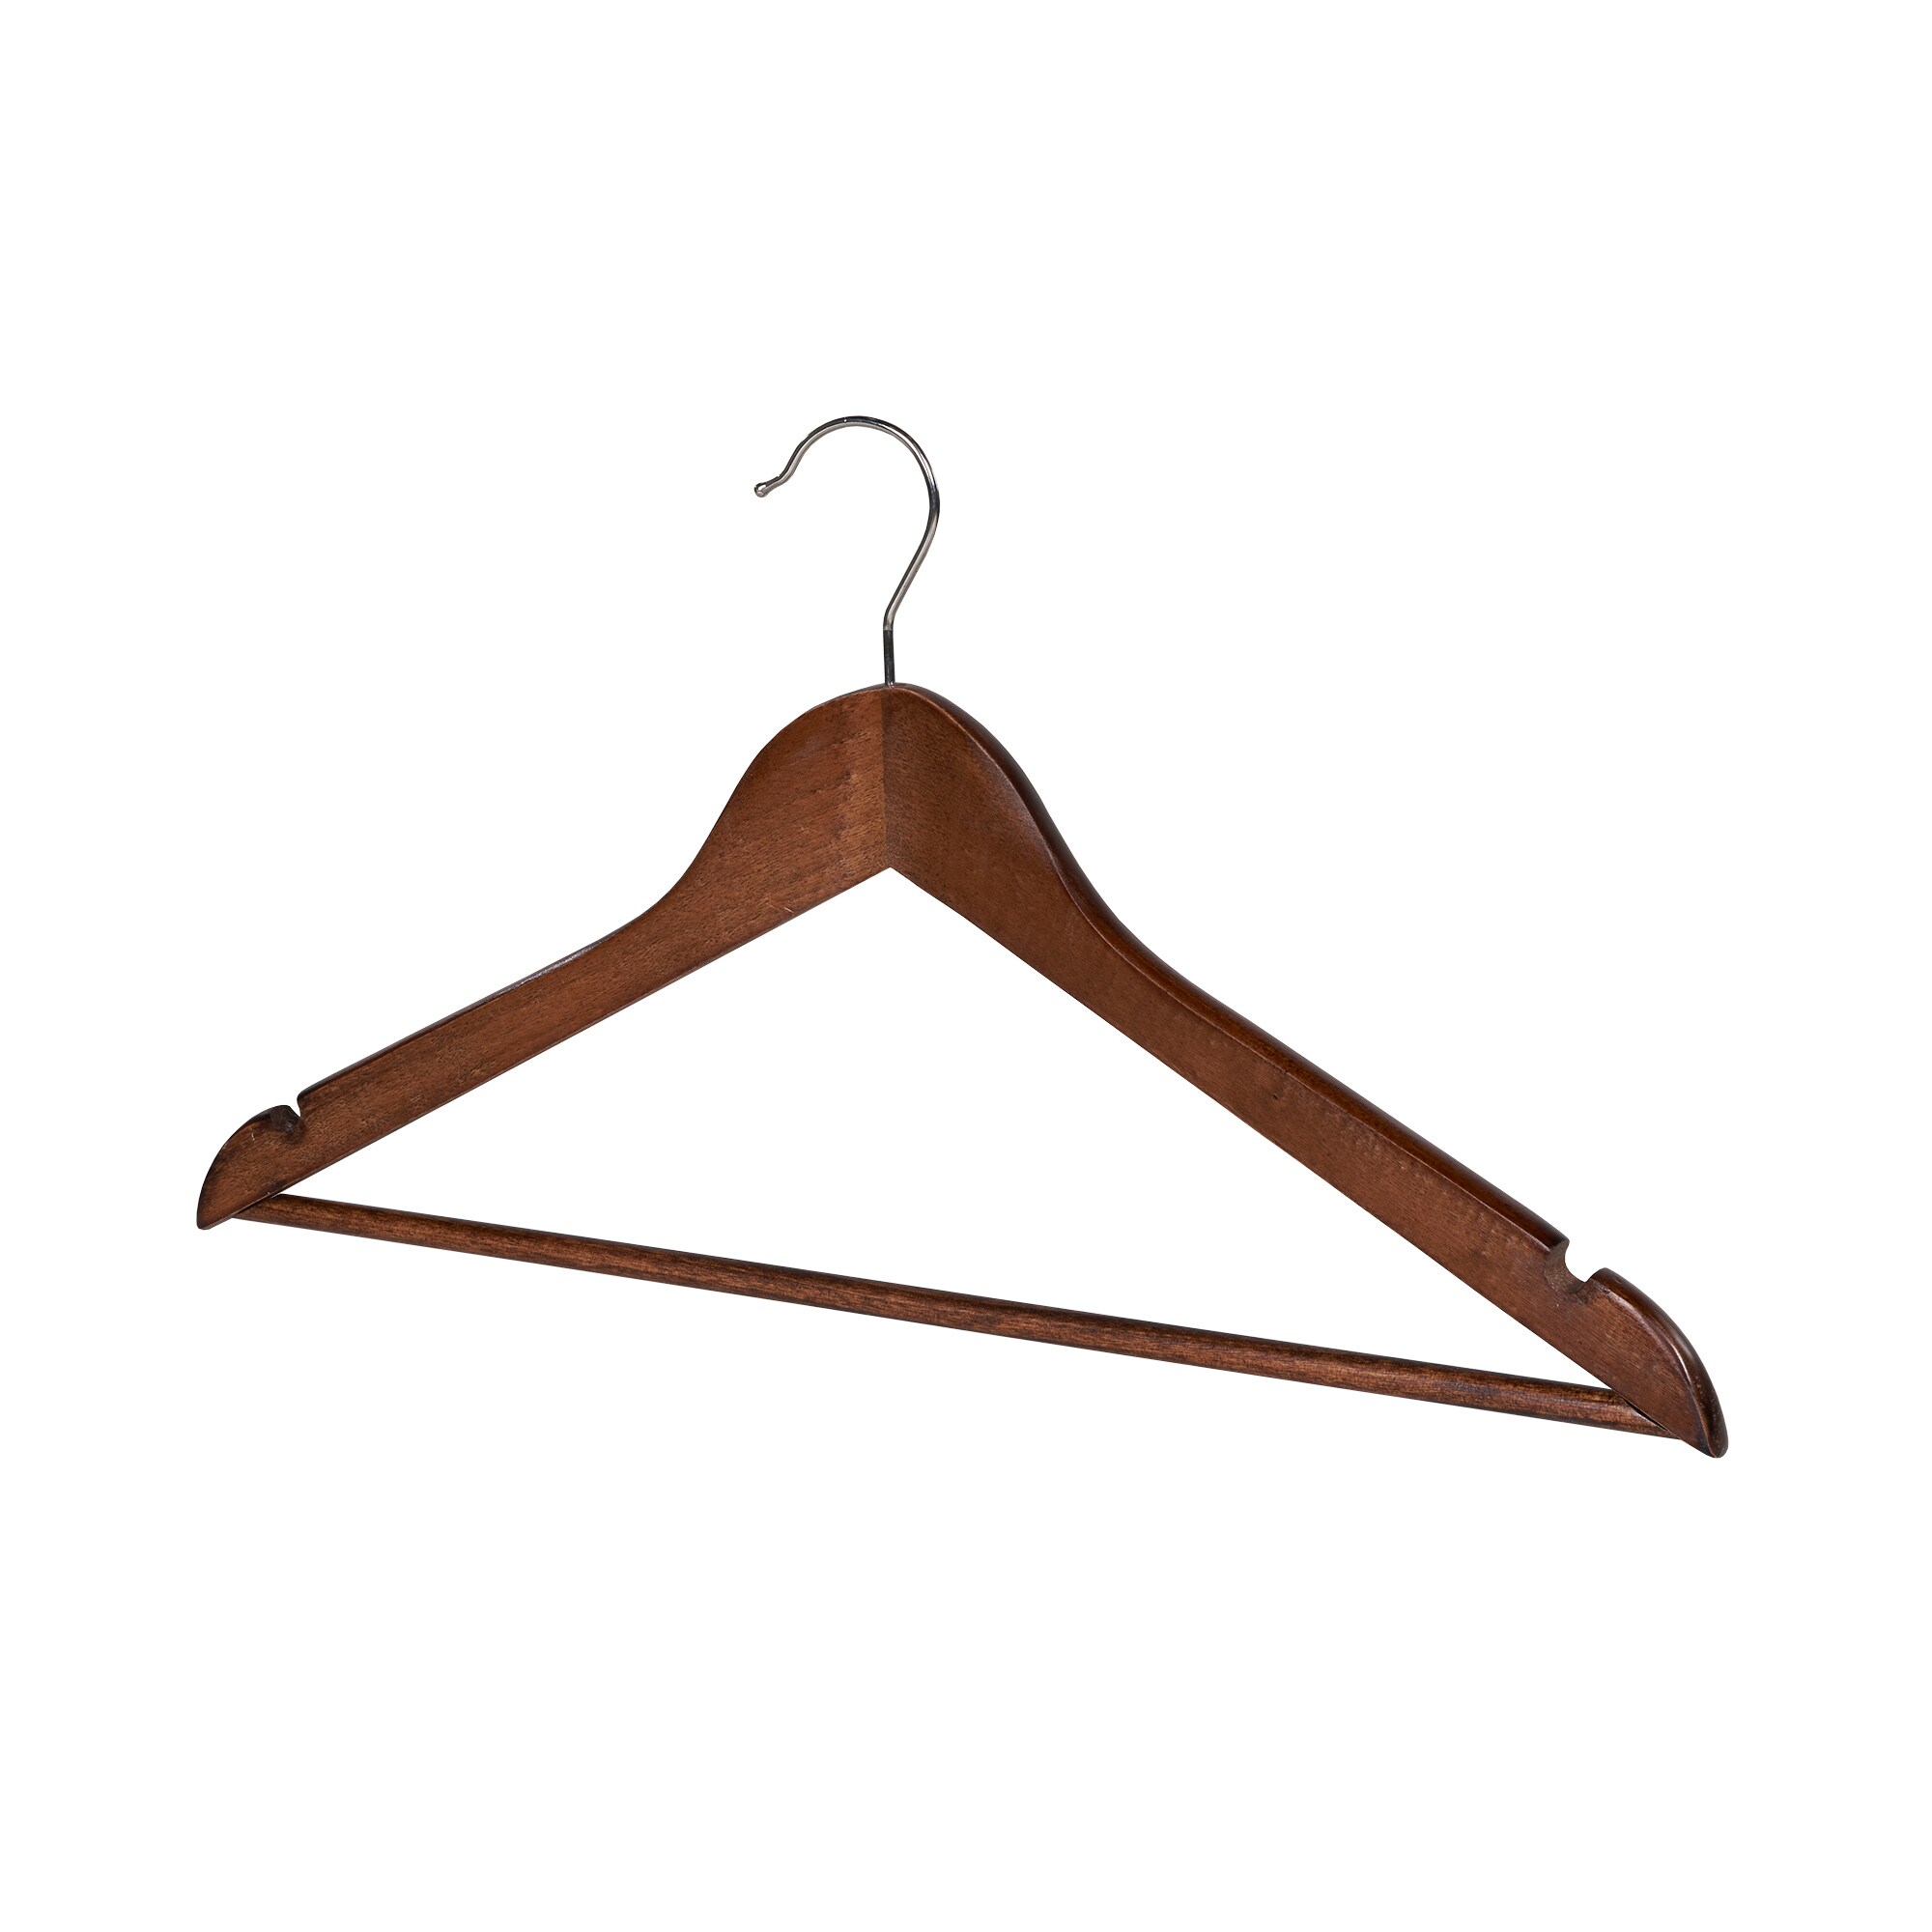   Basics Wood Suit Clothes Hangers, 30-Pack, Natural :  Home & Kitchen